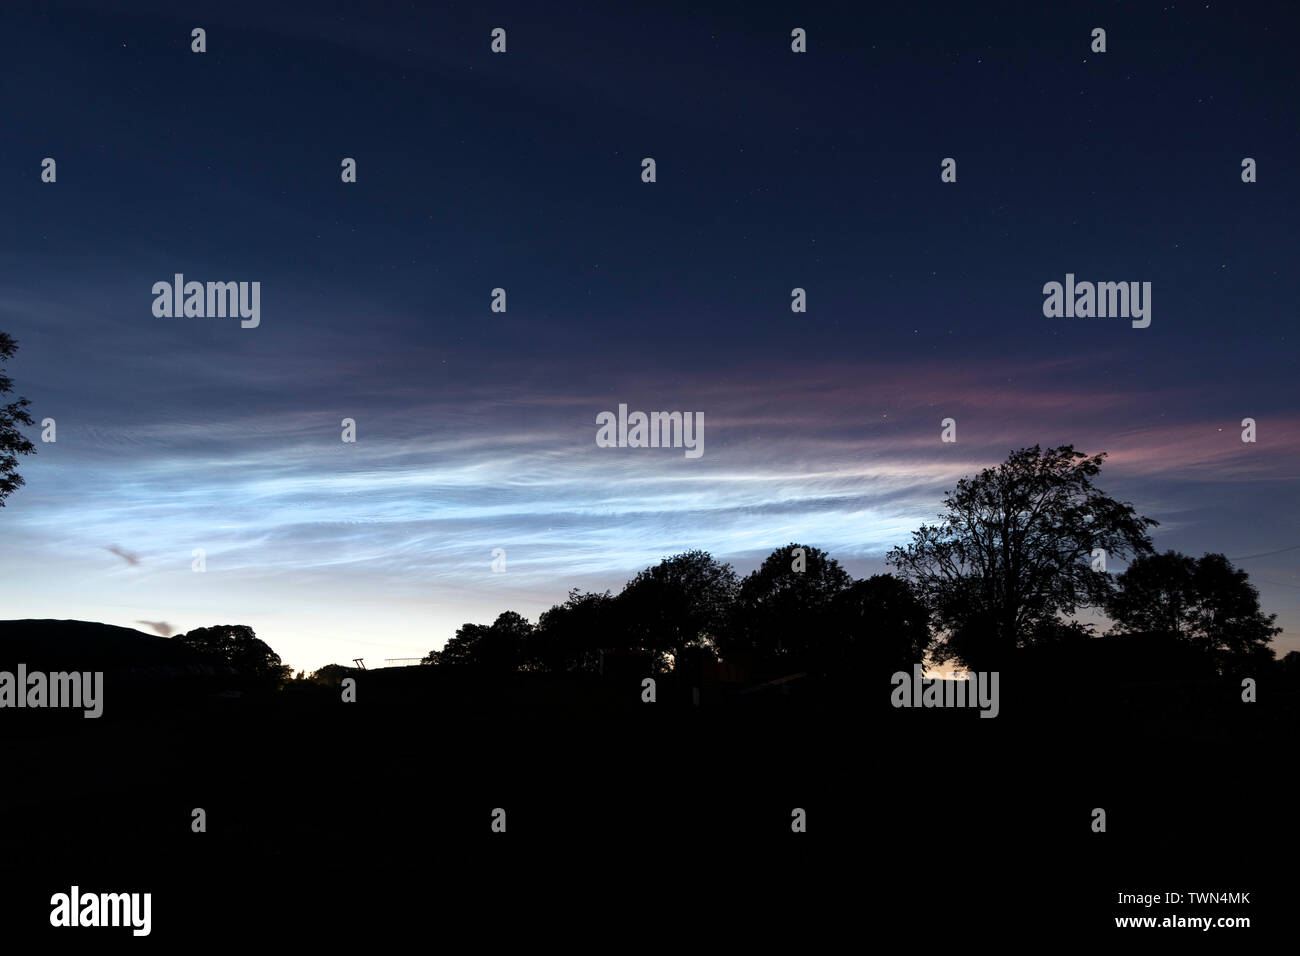 Teesdale, County Durham, UK.  22nd June 2019. UK Weather.  Beautiful noctilucent clouds light up the sky above Teesdale in North East England. These rare luminous clouds form due to ice crystals in the Earth's upper atmosphere and are only visible during astronomical twilight in the summer months. Credit: David Forster/Alamy Live News Stock Photo